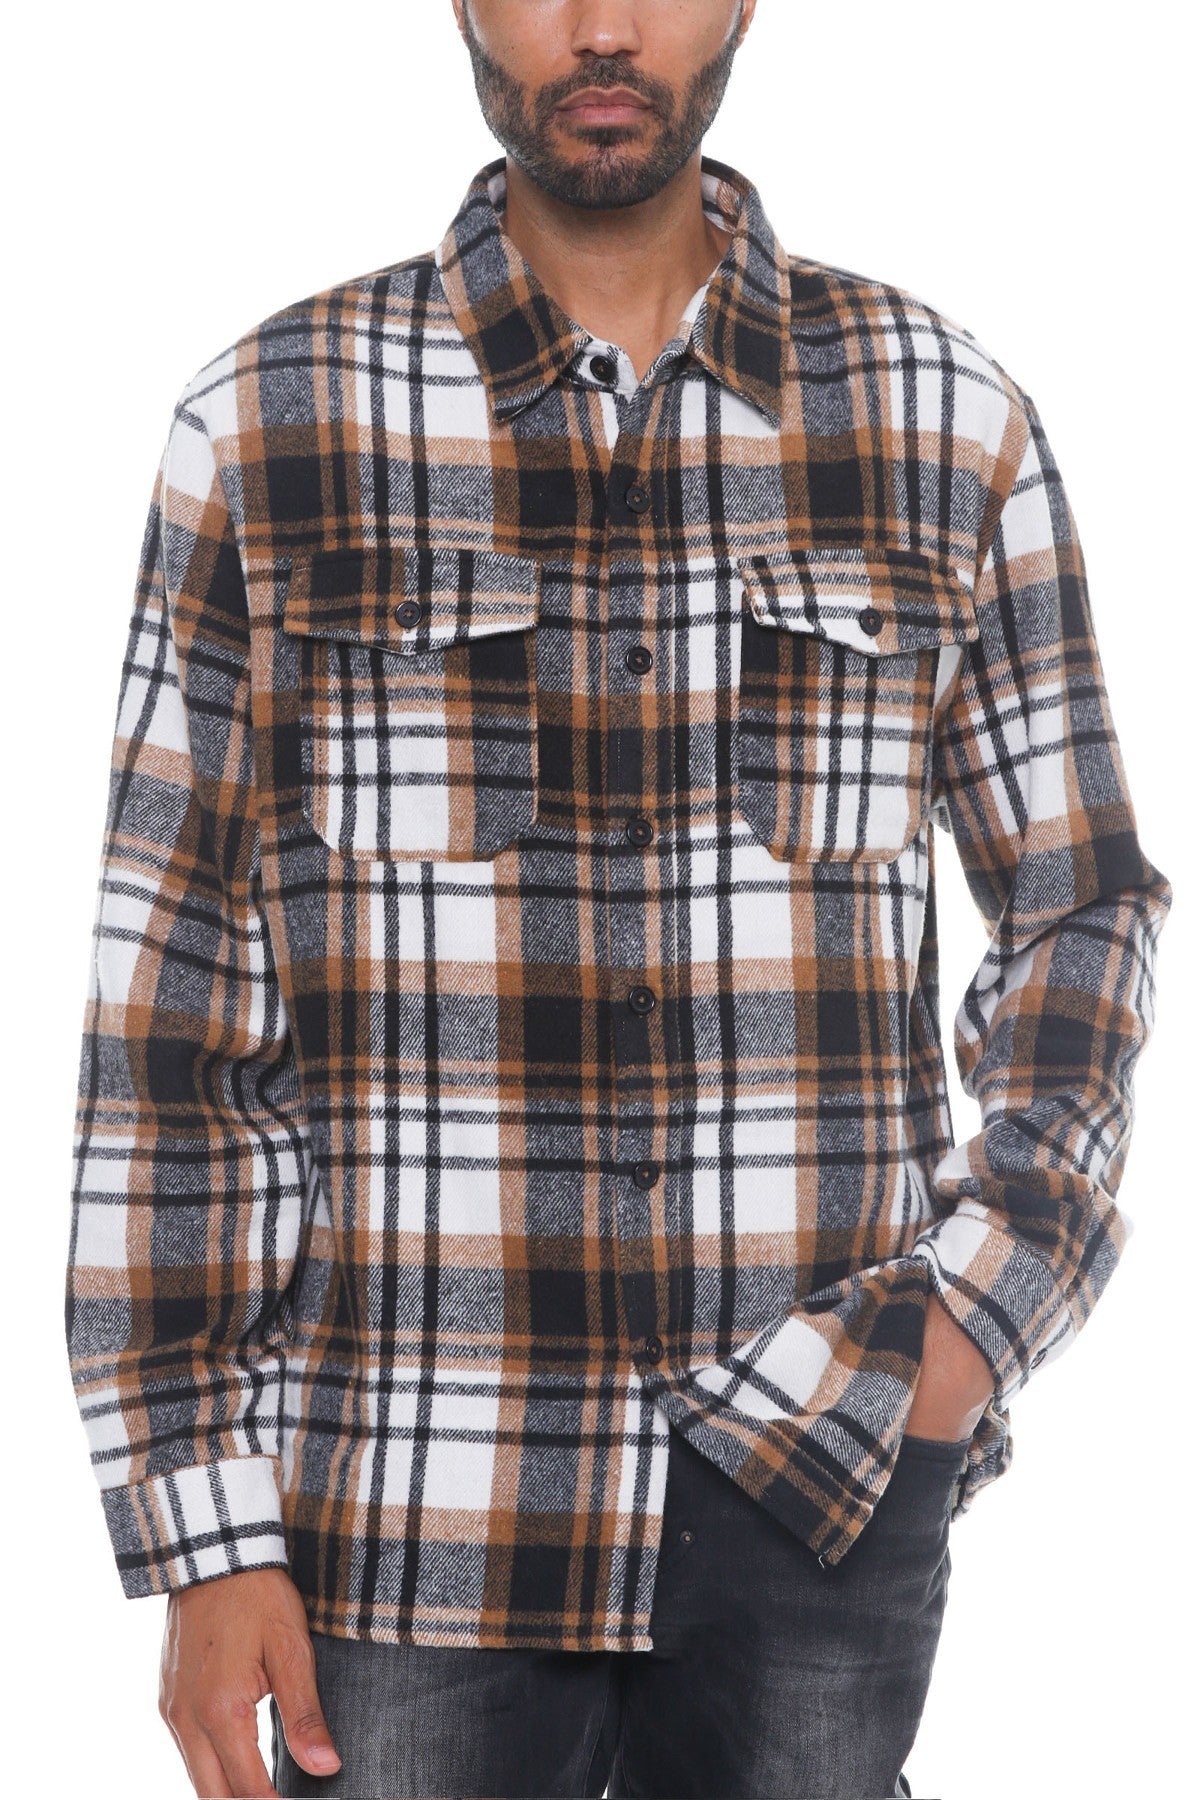 Khaki - Men's Checkered Soft Flannel Shacket - 8 colors - mens button-up shirt at TFC&H Co.